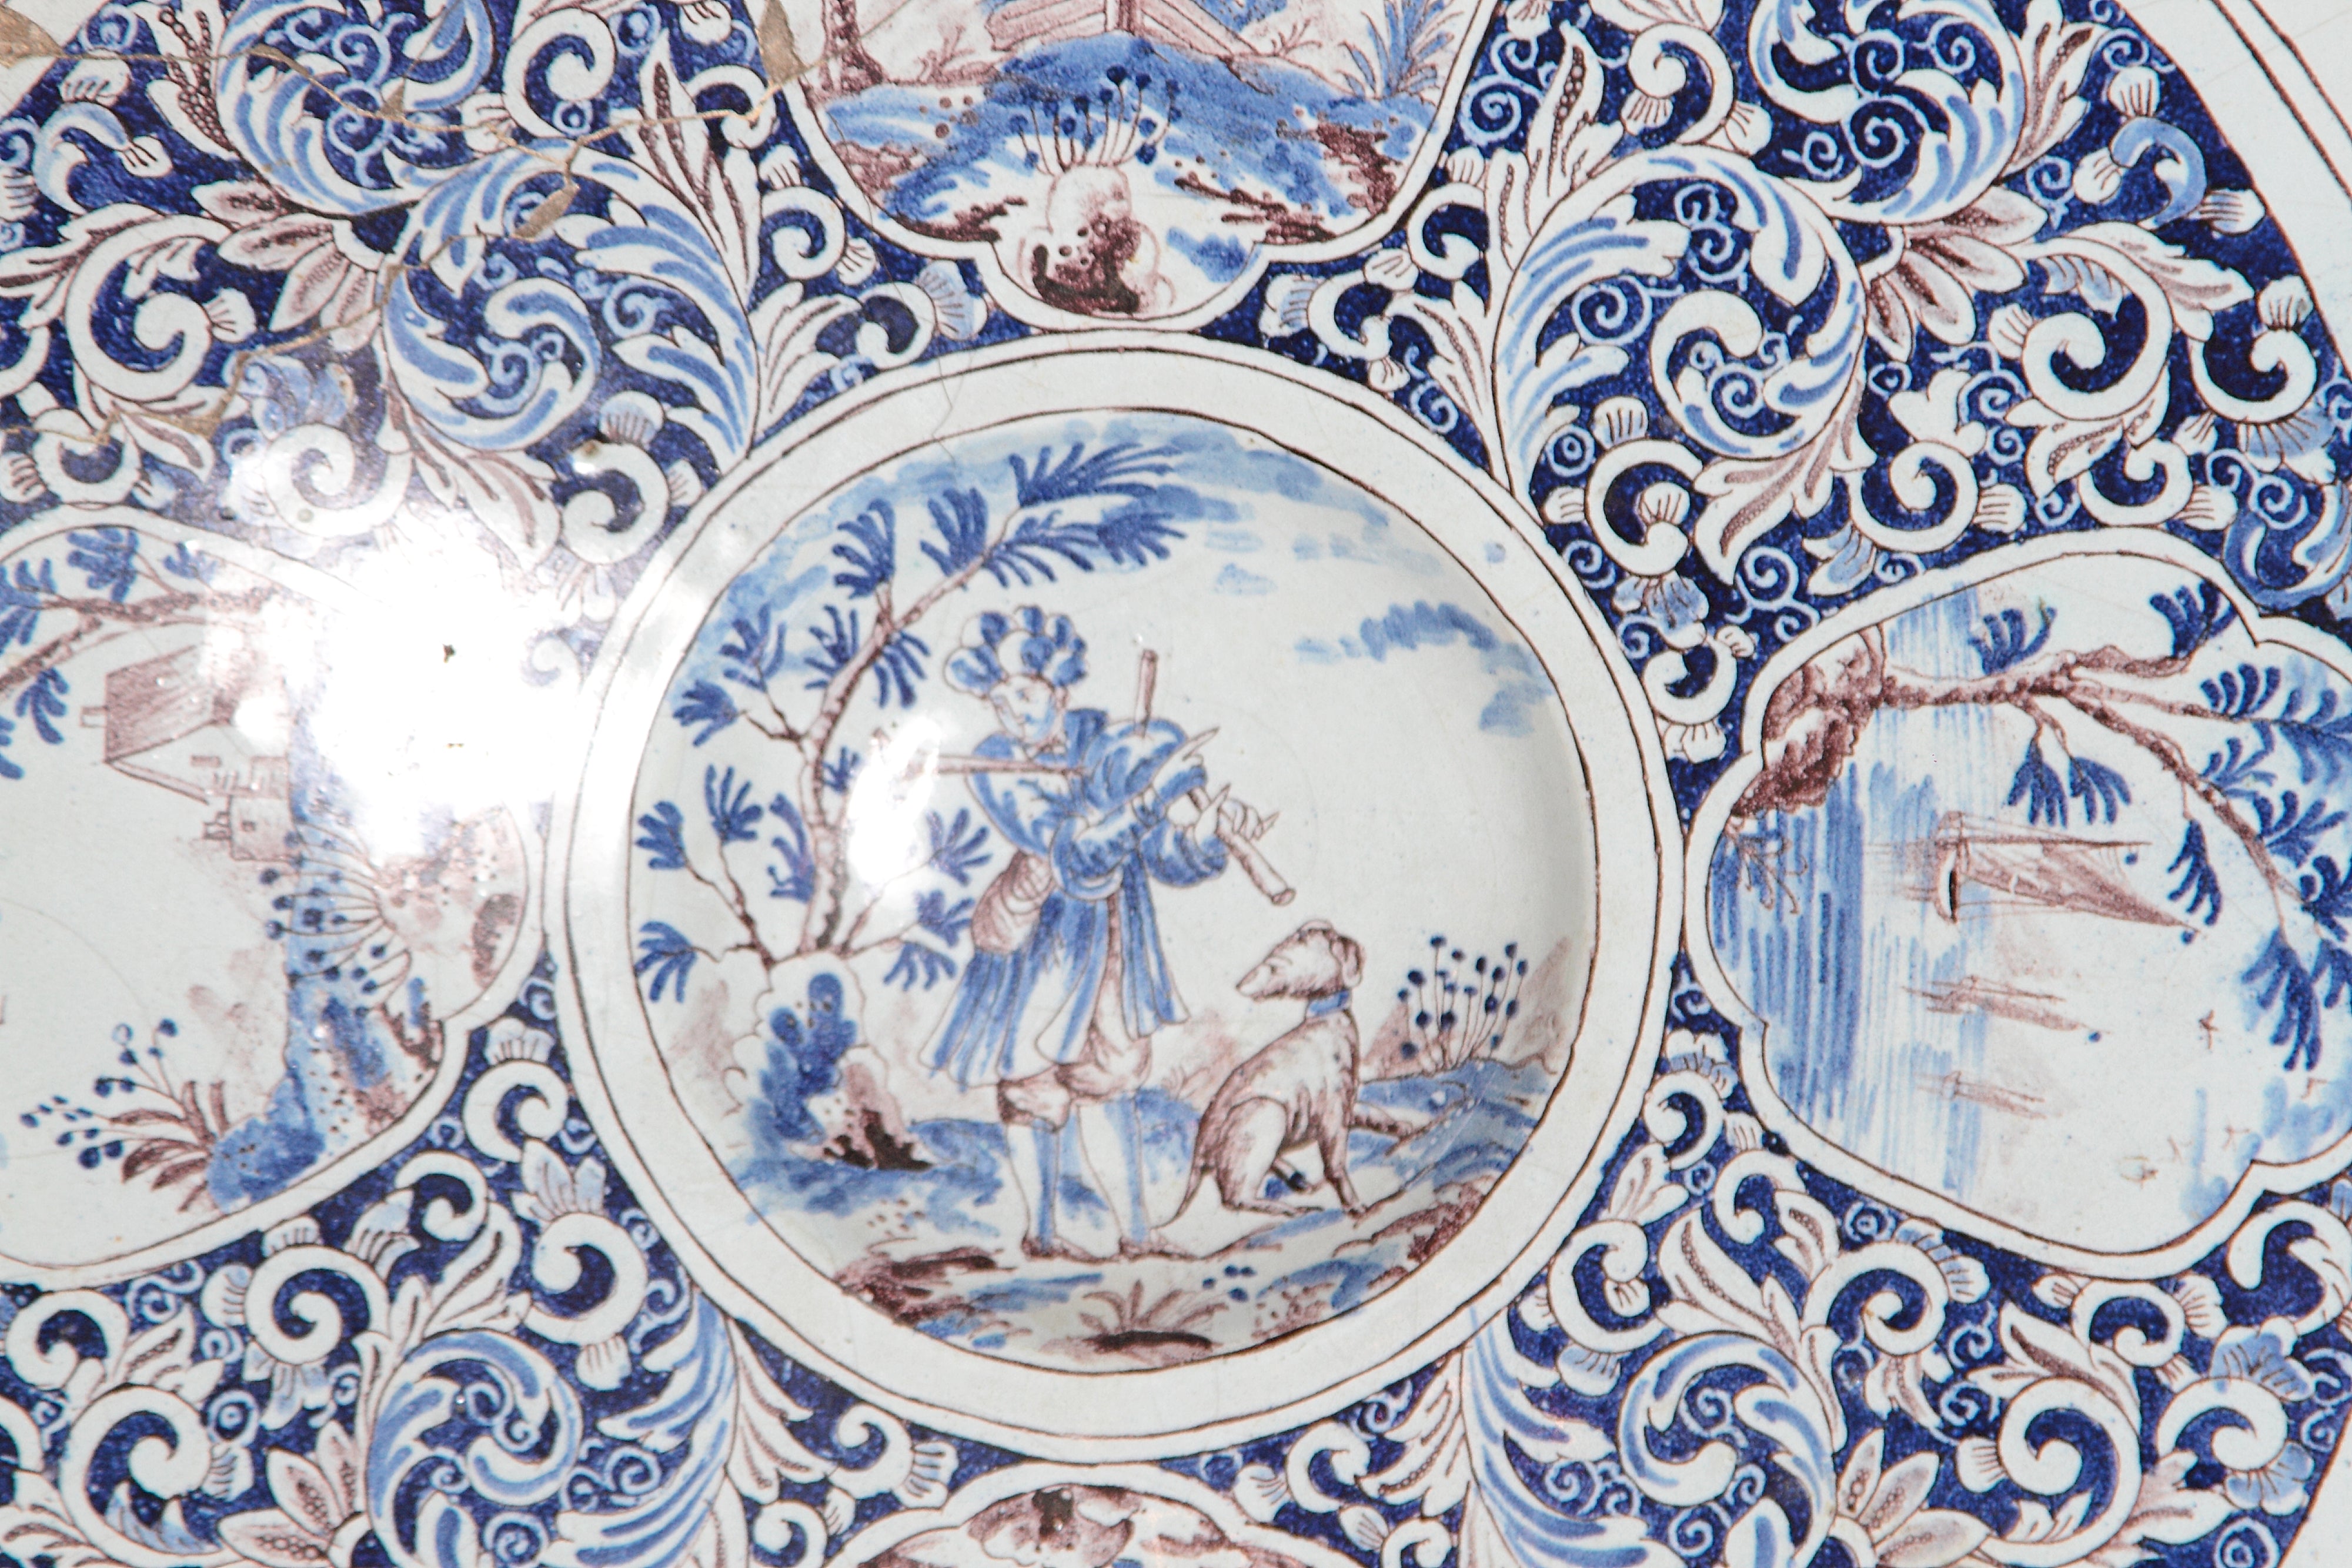 A Large 18th Century Delft Faience Charger with Floral Cartouches